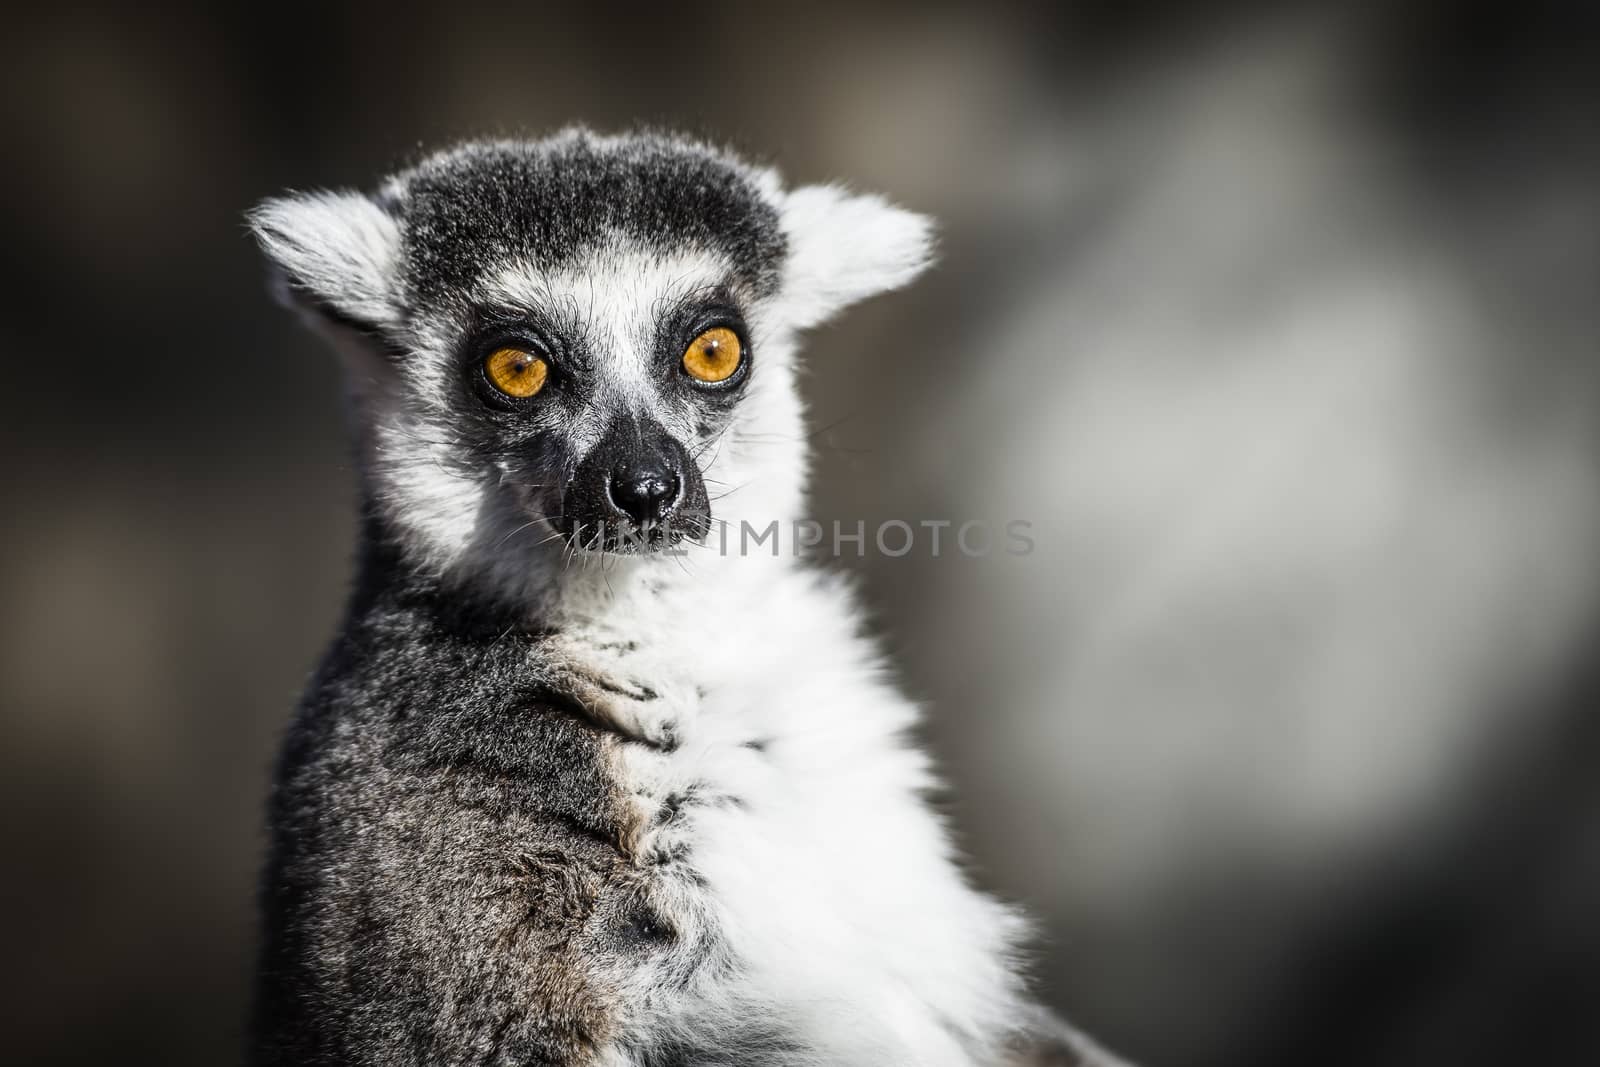 The ring-tailed lemur (Lemur Catta) is a large Strepsirrhine primate and the most recognized lemur due to its long, black and white ringed tail. It belongs to Lemuridae, one of five lemur families, and is the only member of the Lemur genus. 

Like all lemurs it is endemic to the island of Madagascar. Known locally in Malagasy. It inhabits gallery forests to spiny scrub in the southern regions of the island. It is omnivorous and the most terrestrial of lemurs. The animal is diurnal, being active exclusively in daylight hours.

Photographed using Nikon-D800E (36 megapixels) DSLR with AF-S NIKKOR 70-200 mm f/2.8G ED VR II lens at focal length 200 mm, ISO 100, and exposure 1/1600 sec at f/2.8.